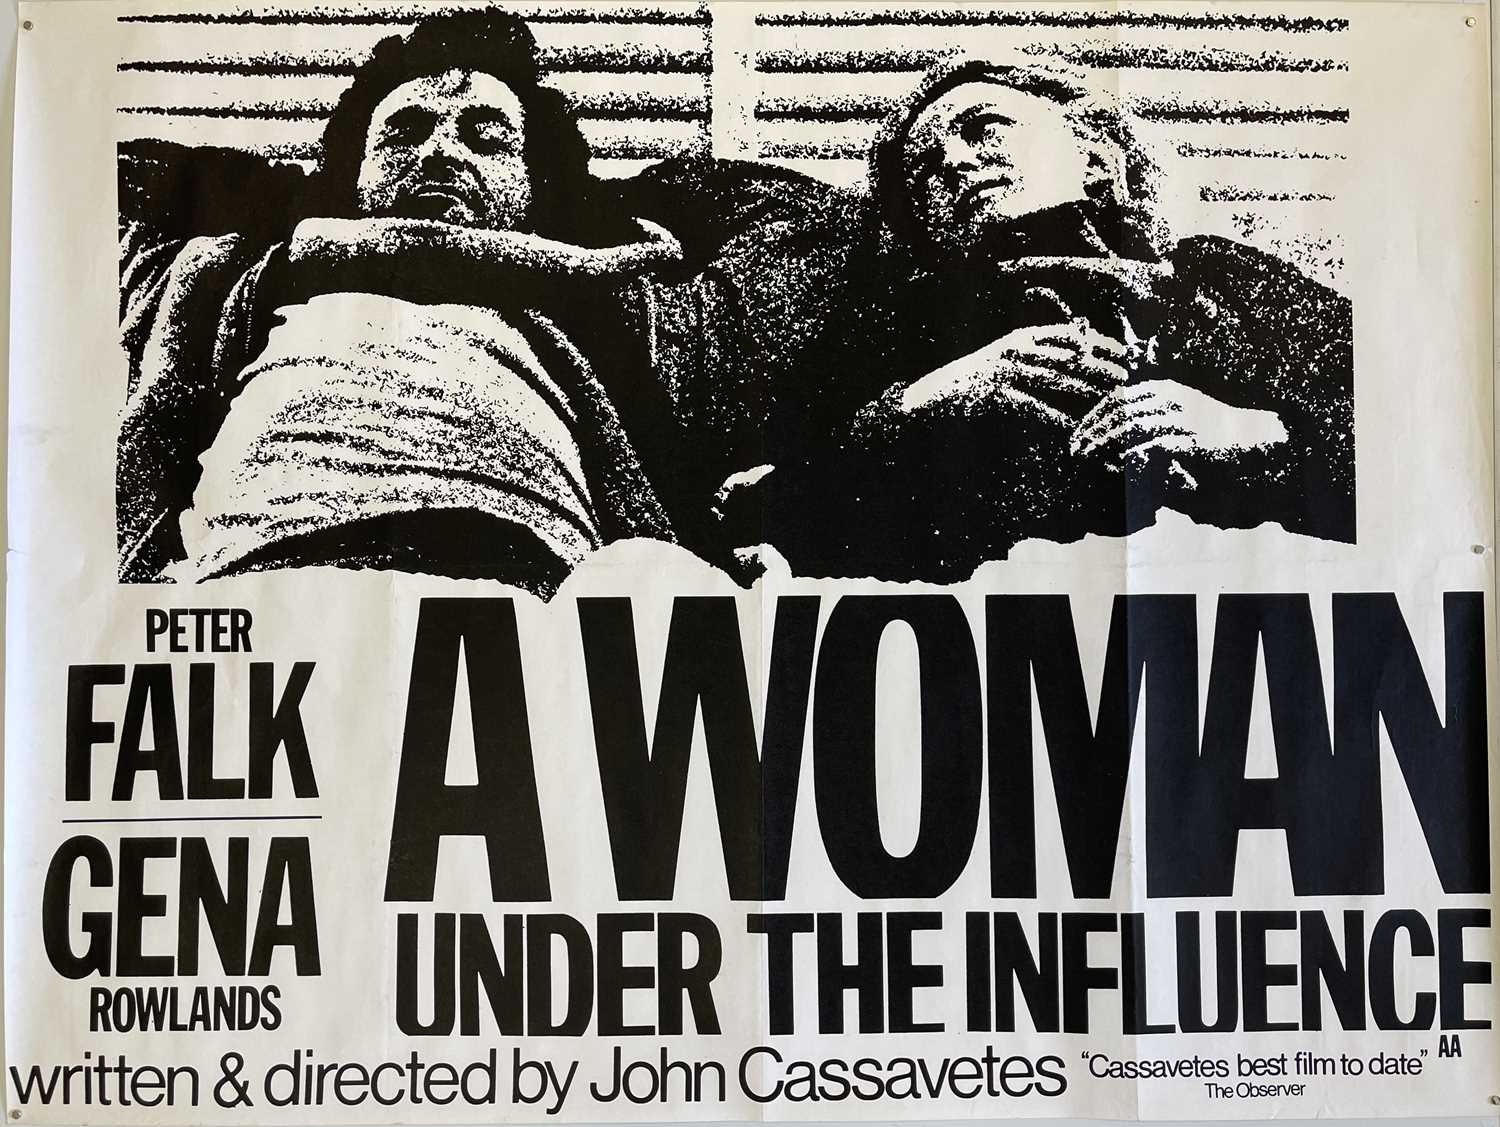 A Woman Under the Influence